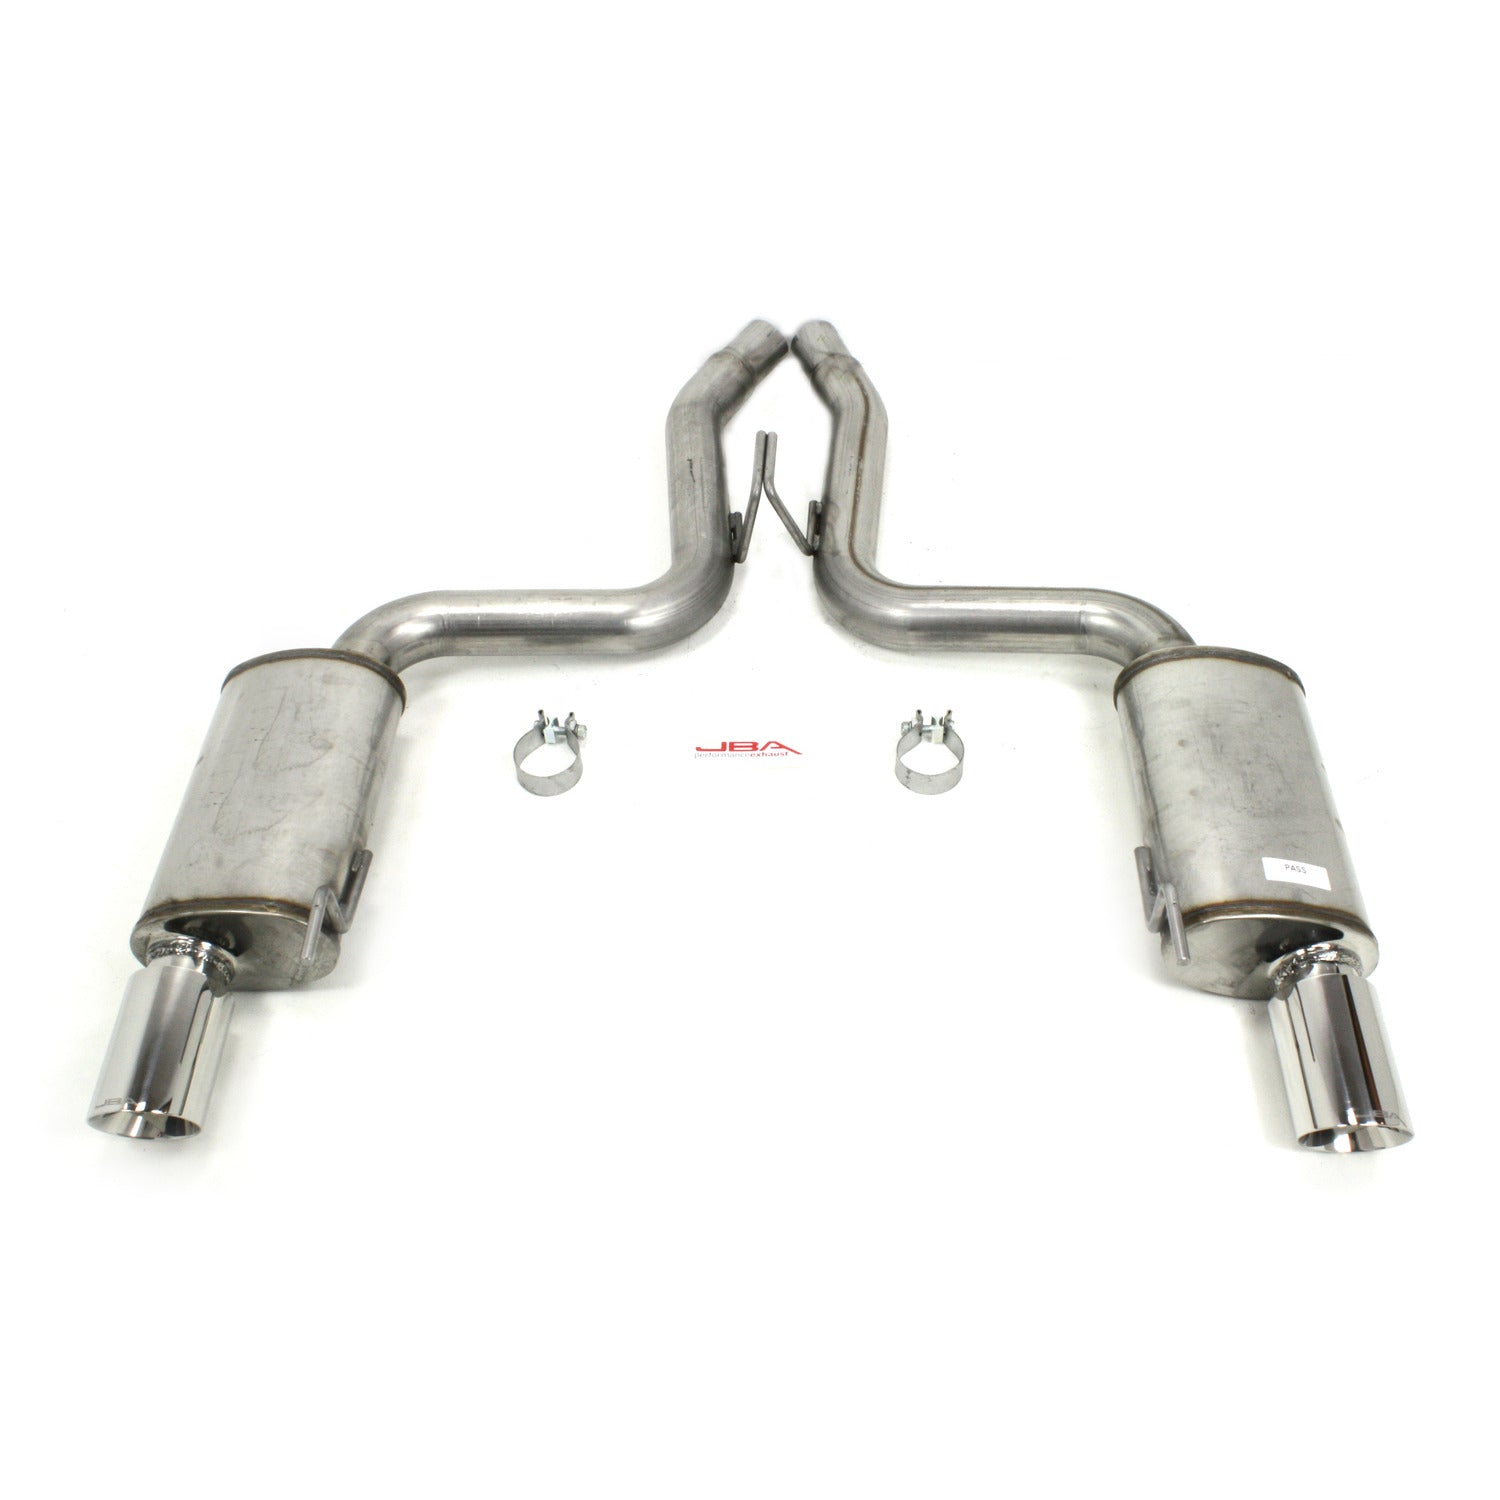 JBA Performance Exhaust 40-2686 Stainless Steel Exhaust System 2015-17 Mustang 5.0 2 1/2" to 3" Axle Back Exhaust with 4" double wall tips